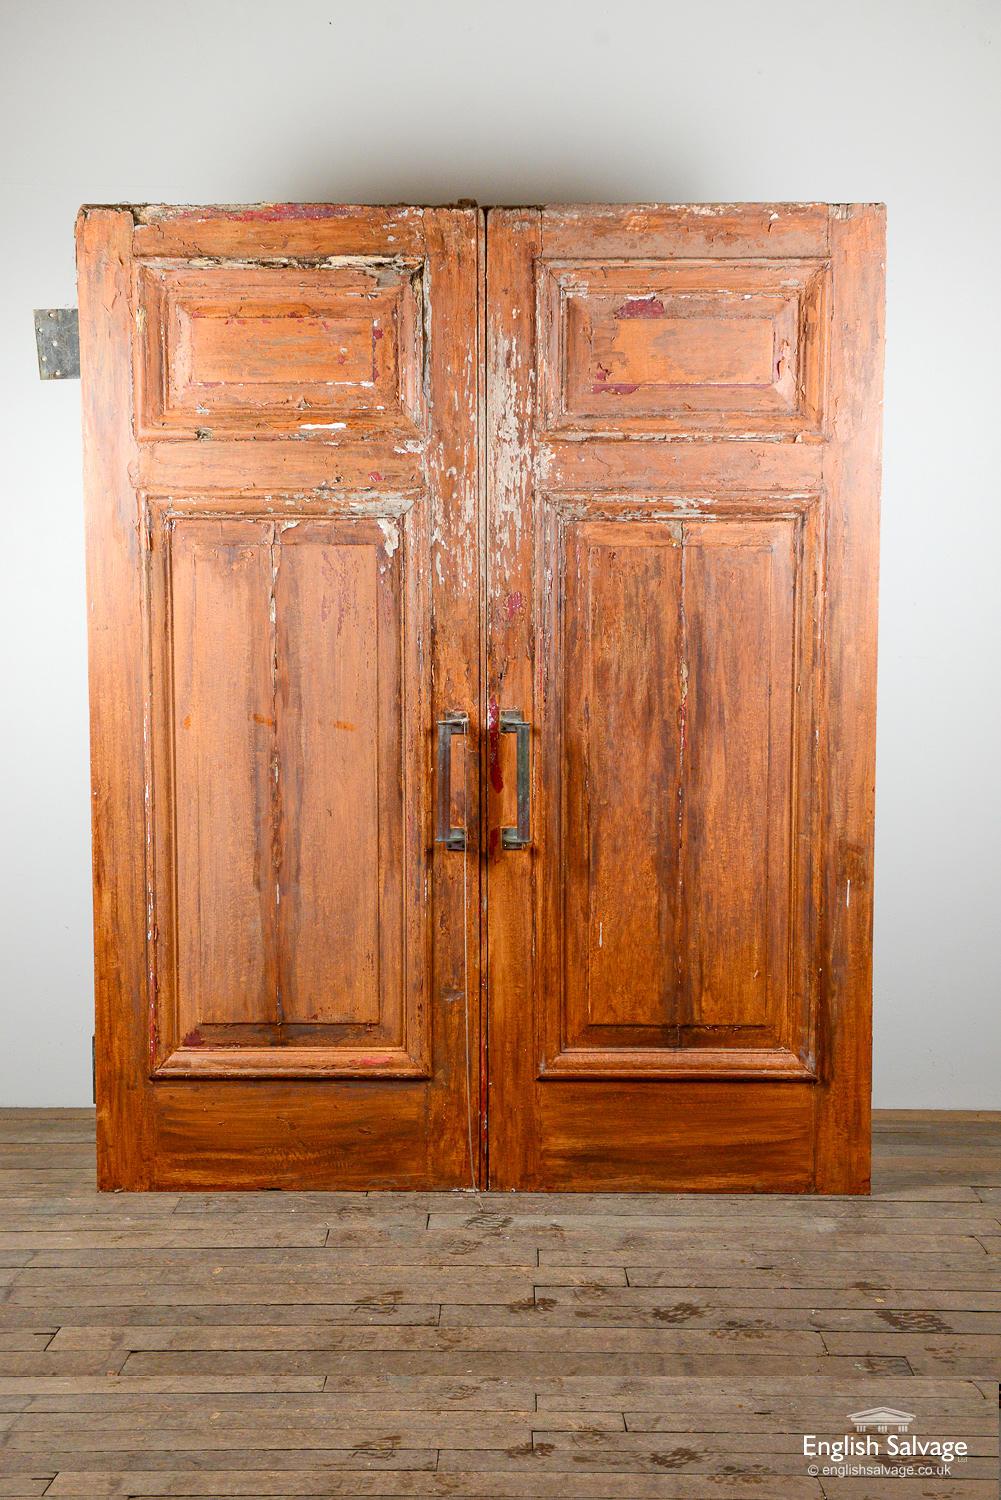 Reclaimed old oak double doors, each with two fielded panels. Overall width of double doors below, one door is 86.5cm wide and the other is 88cm. Some loss to corners and wear expected with age. Two large hinges and modern door pulls attached.